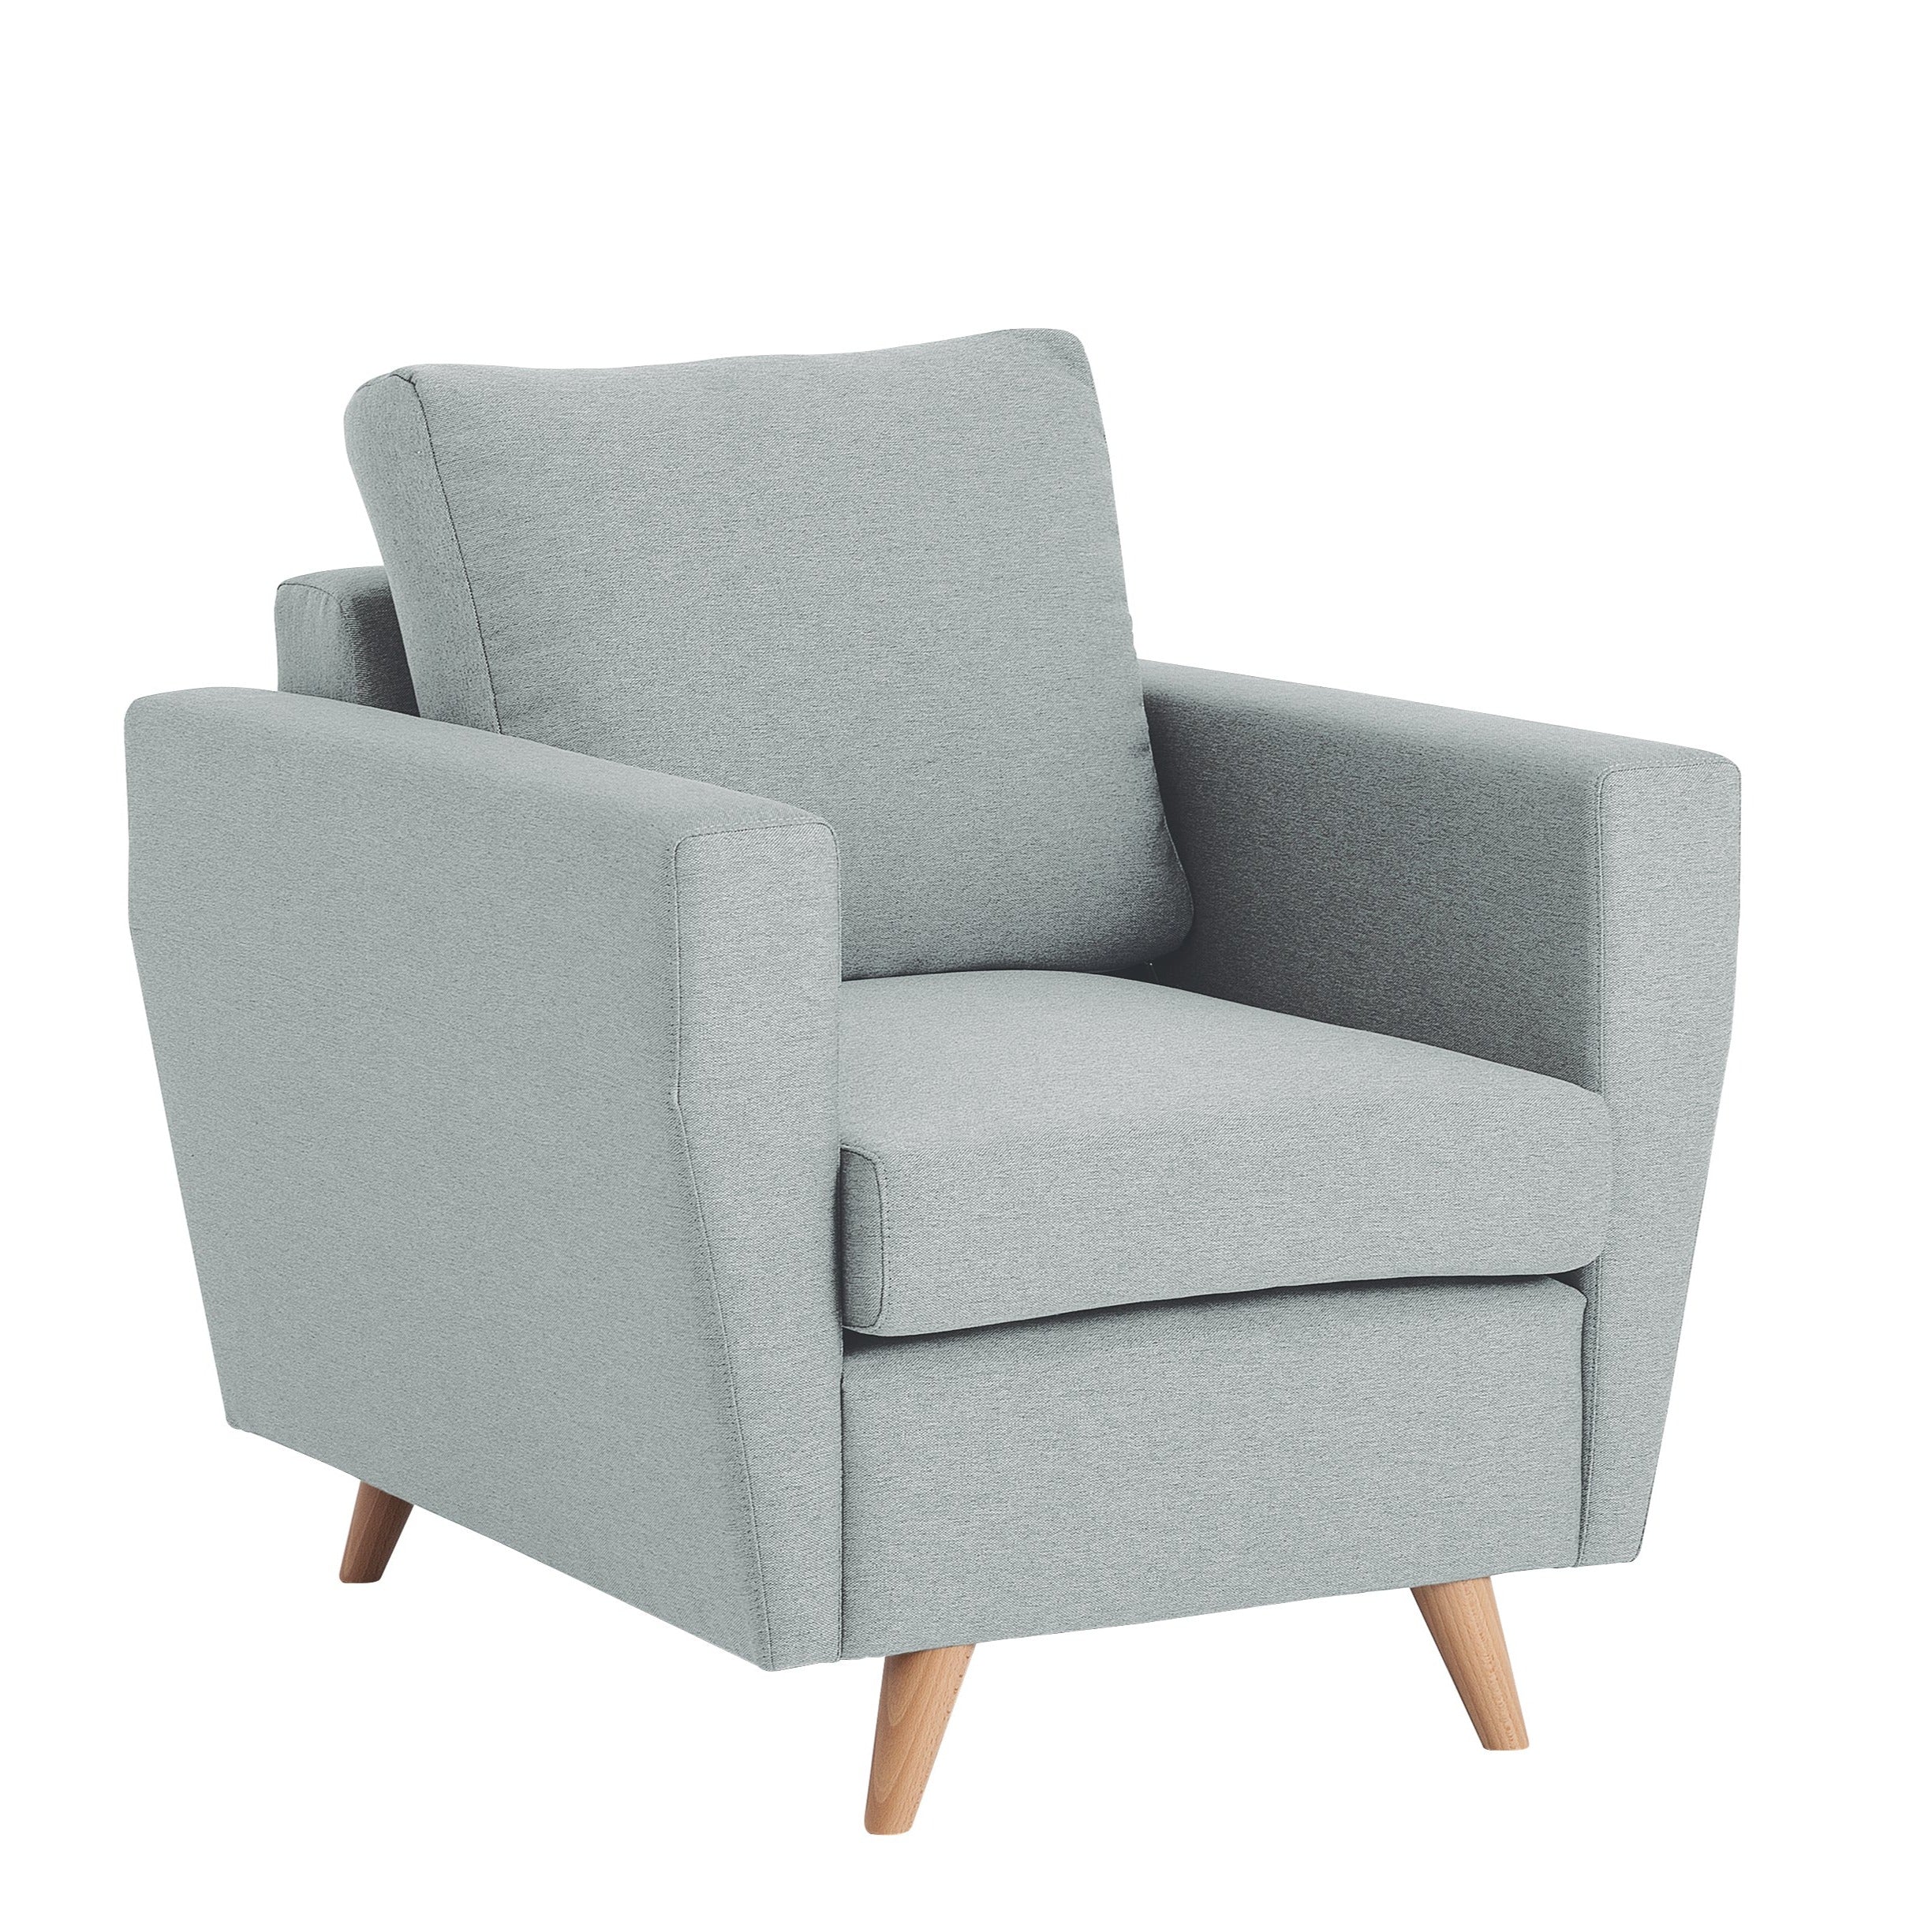 LOVER Armchair grey, side view, white background